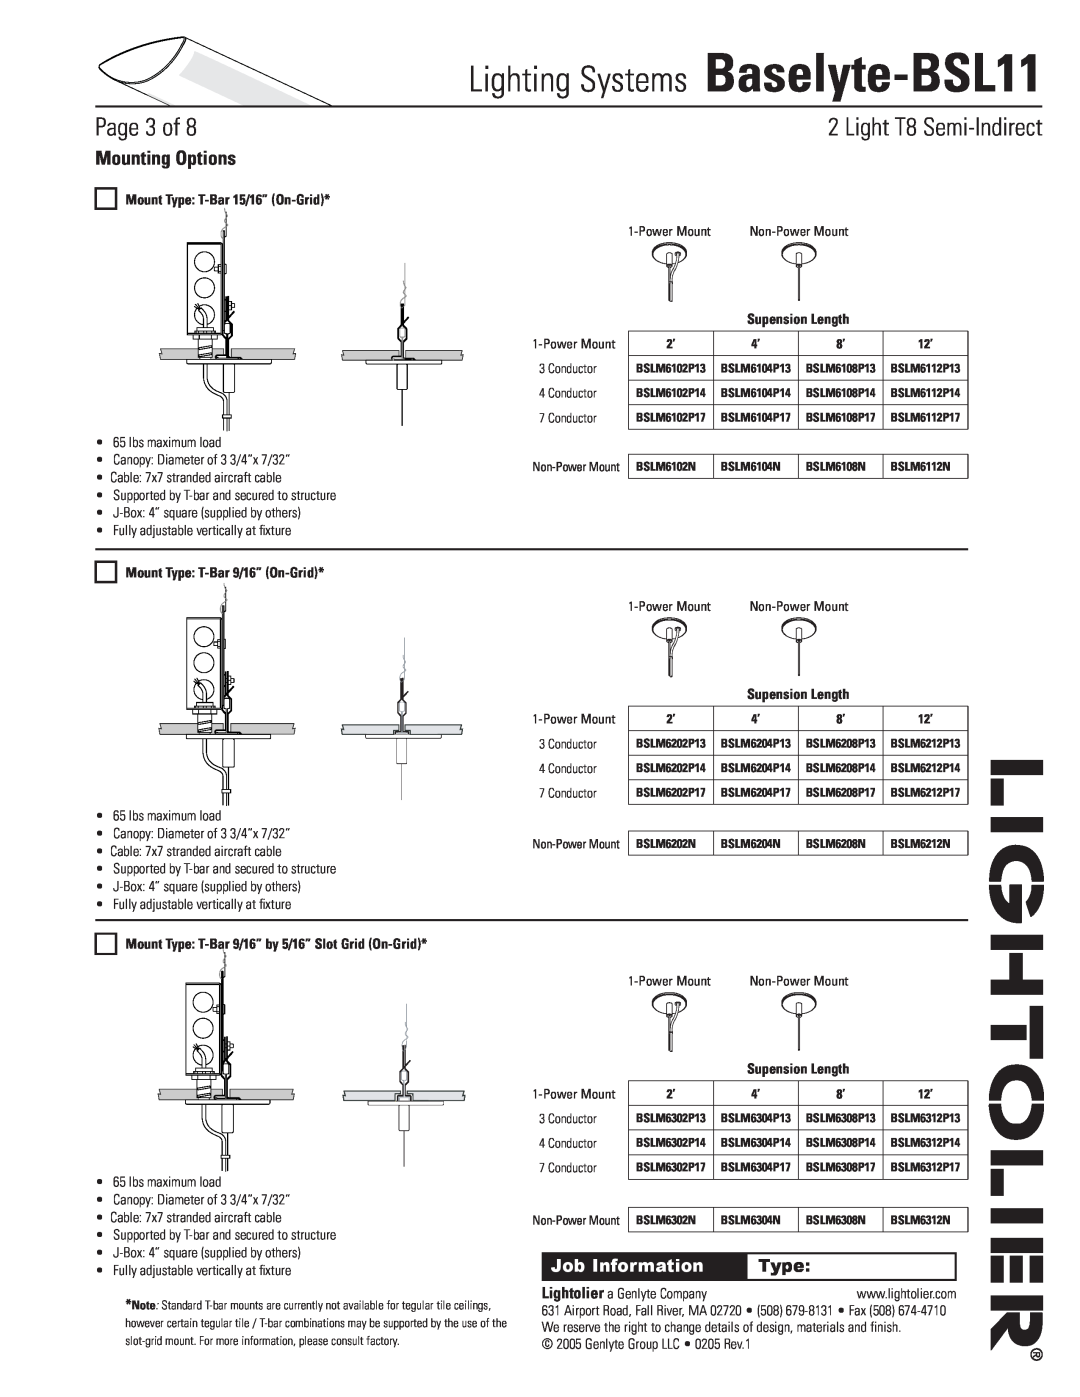 Lightolier Baselyte-BSL11 Mounting Options, Mount Type T-Bar15/16” On-Grid, Supension Length, Page of, Job Information 